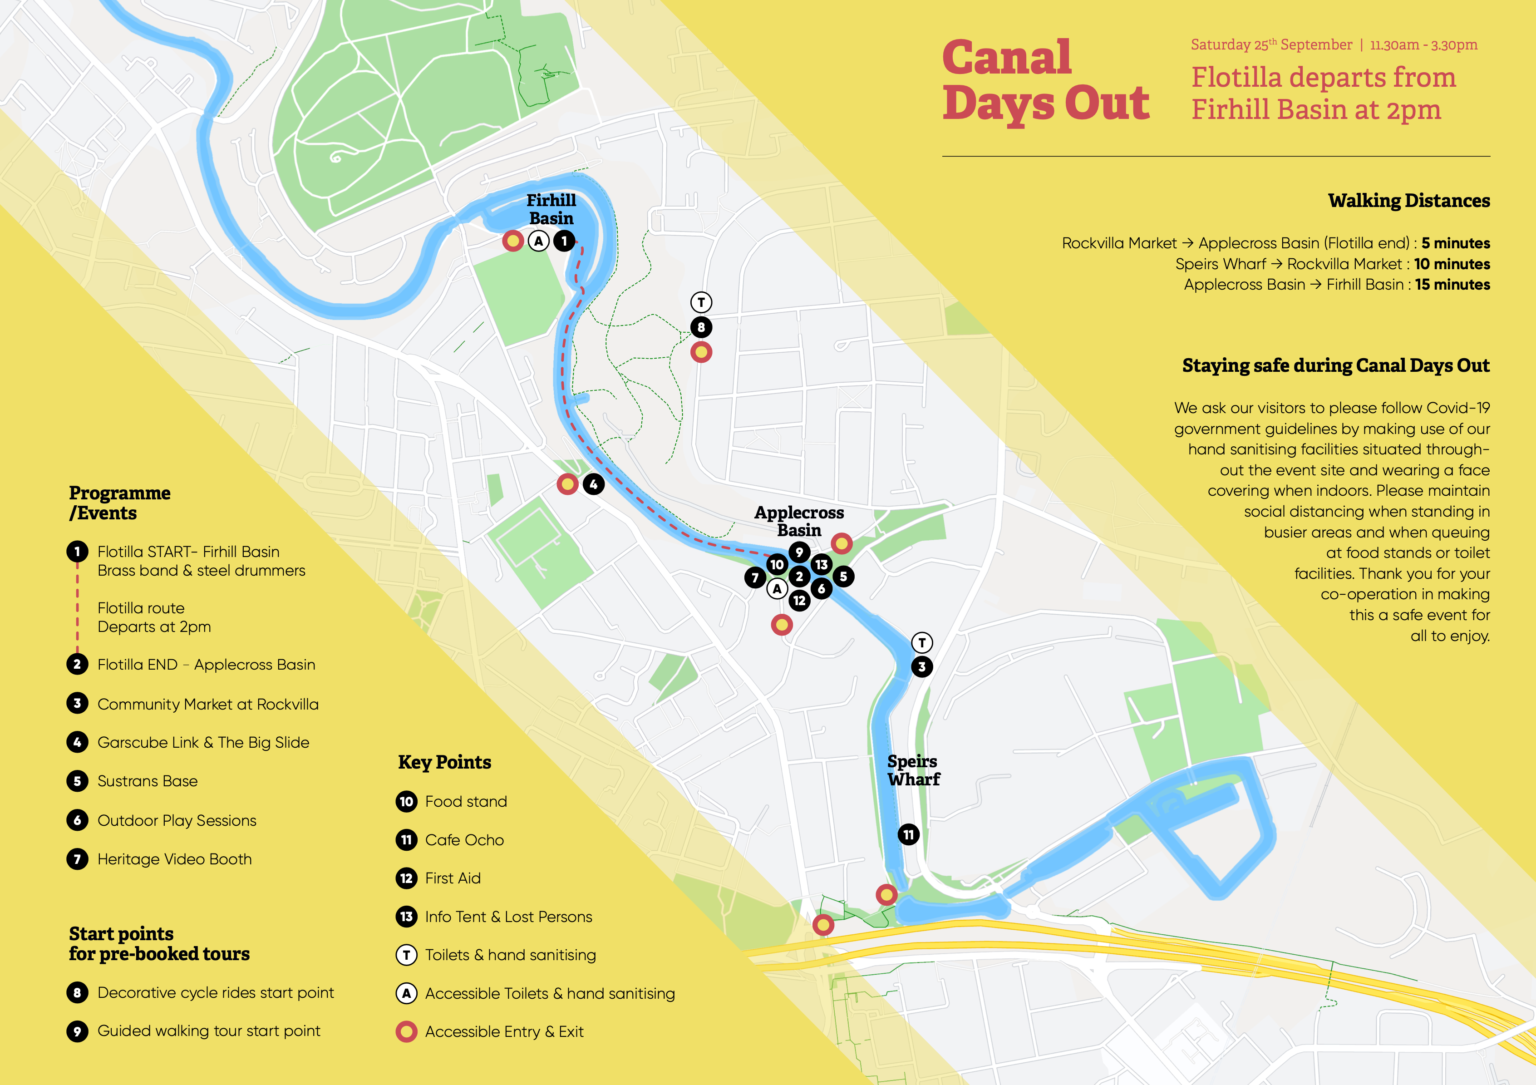 Canal Days Out Saturday 25th September EVENTS PROGRAMME Glasgow Canal